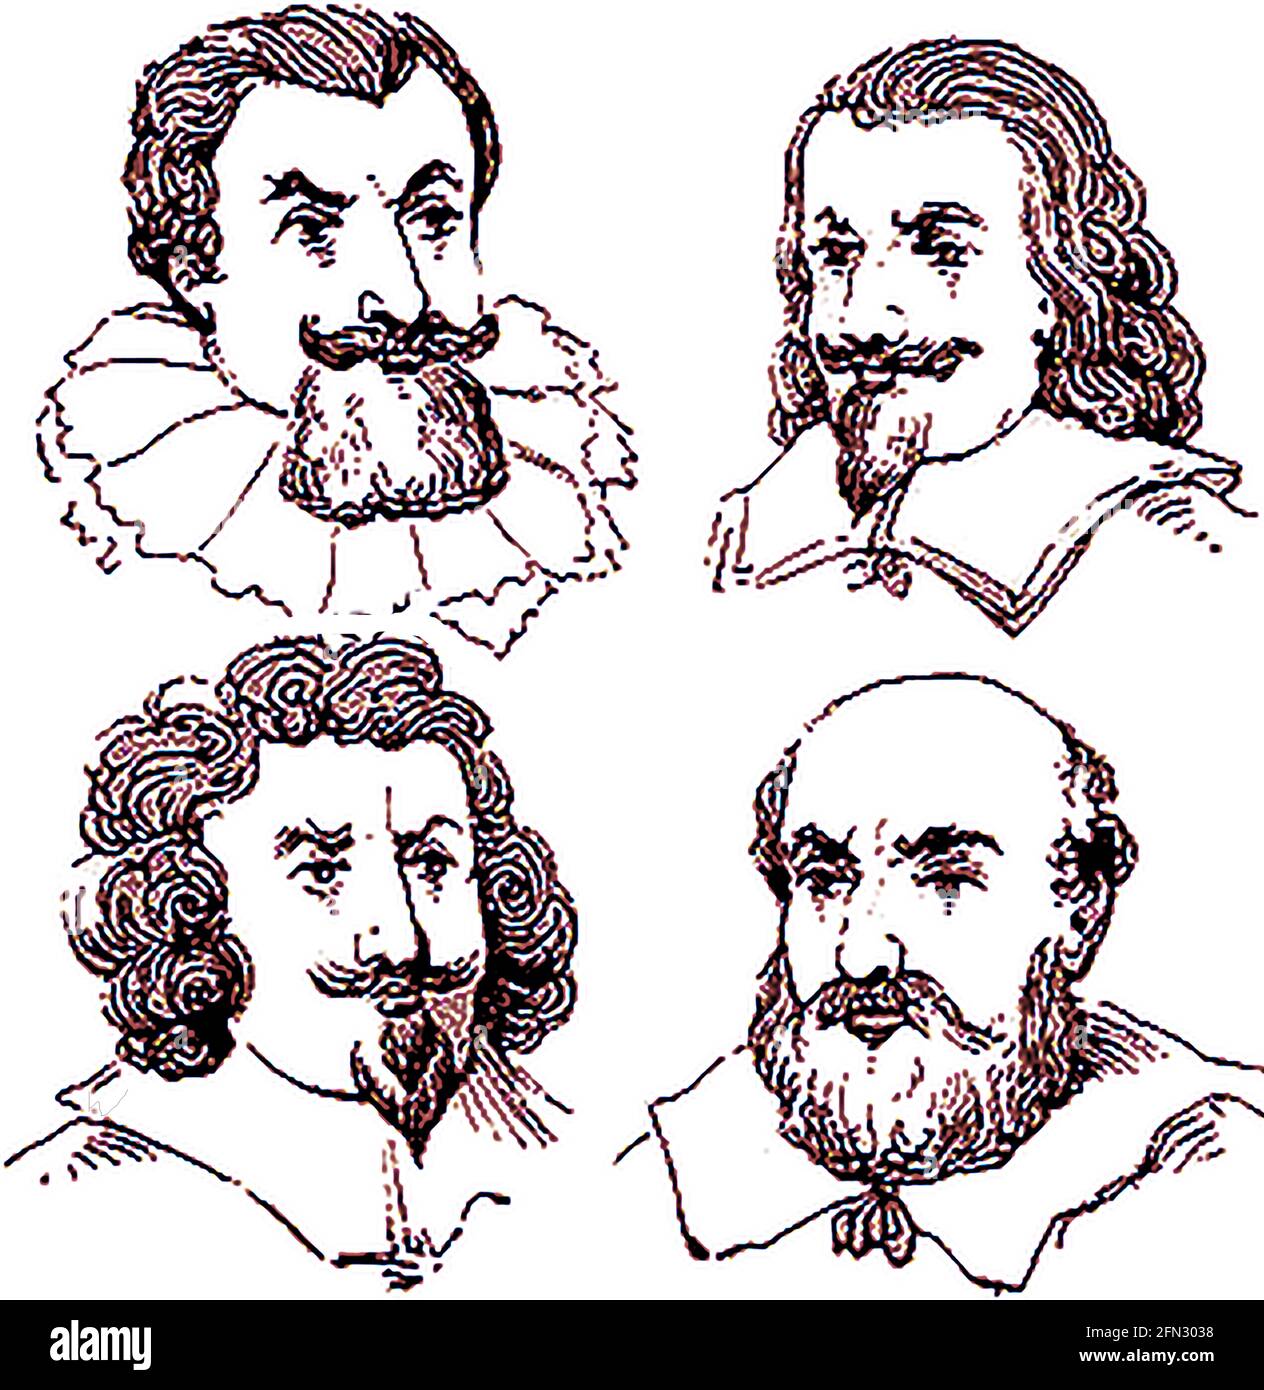 Styles of beard common in the 16th century.   -------In the 15th century, most European men were clean-shaken b ut by the 16th-century   beards were quite common and varied in style. Stock Photo